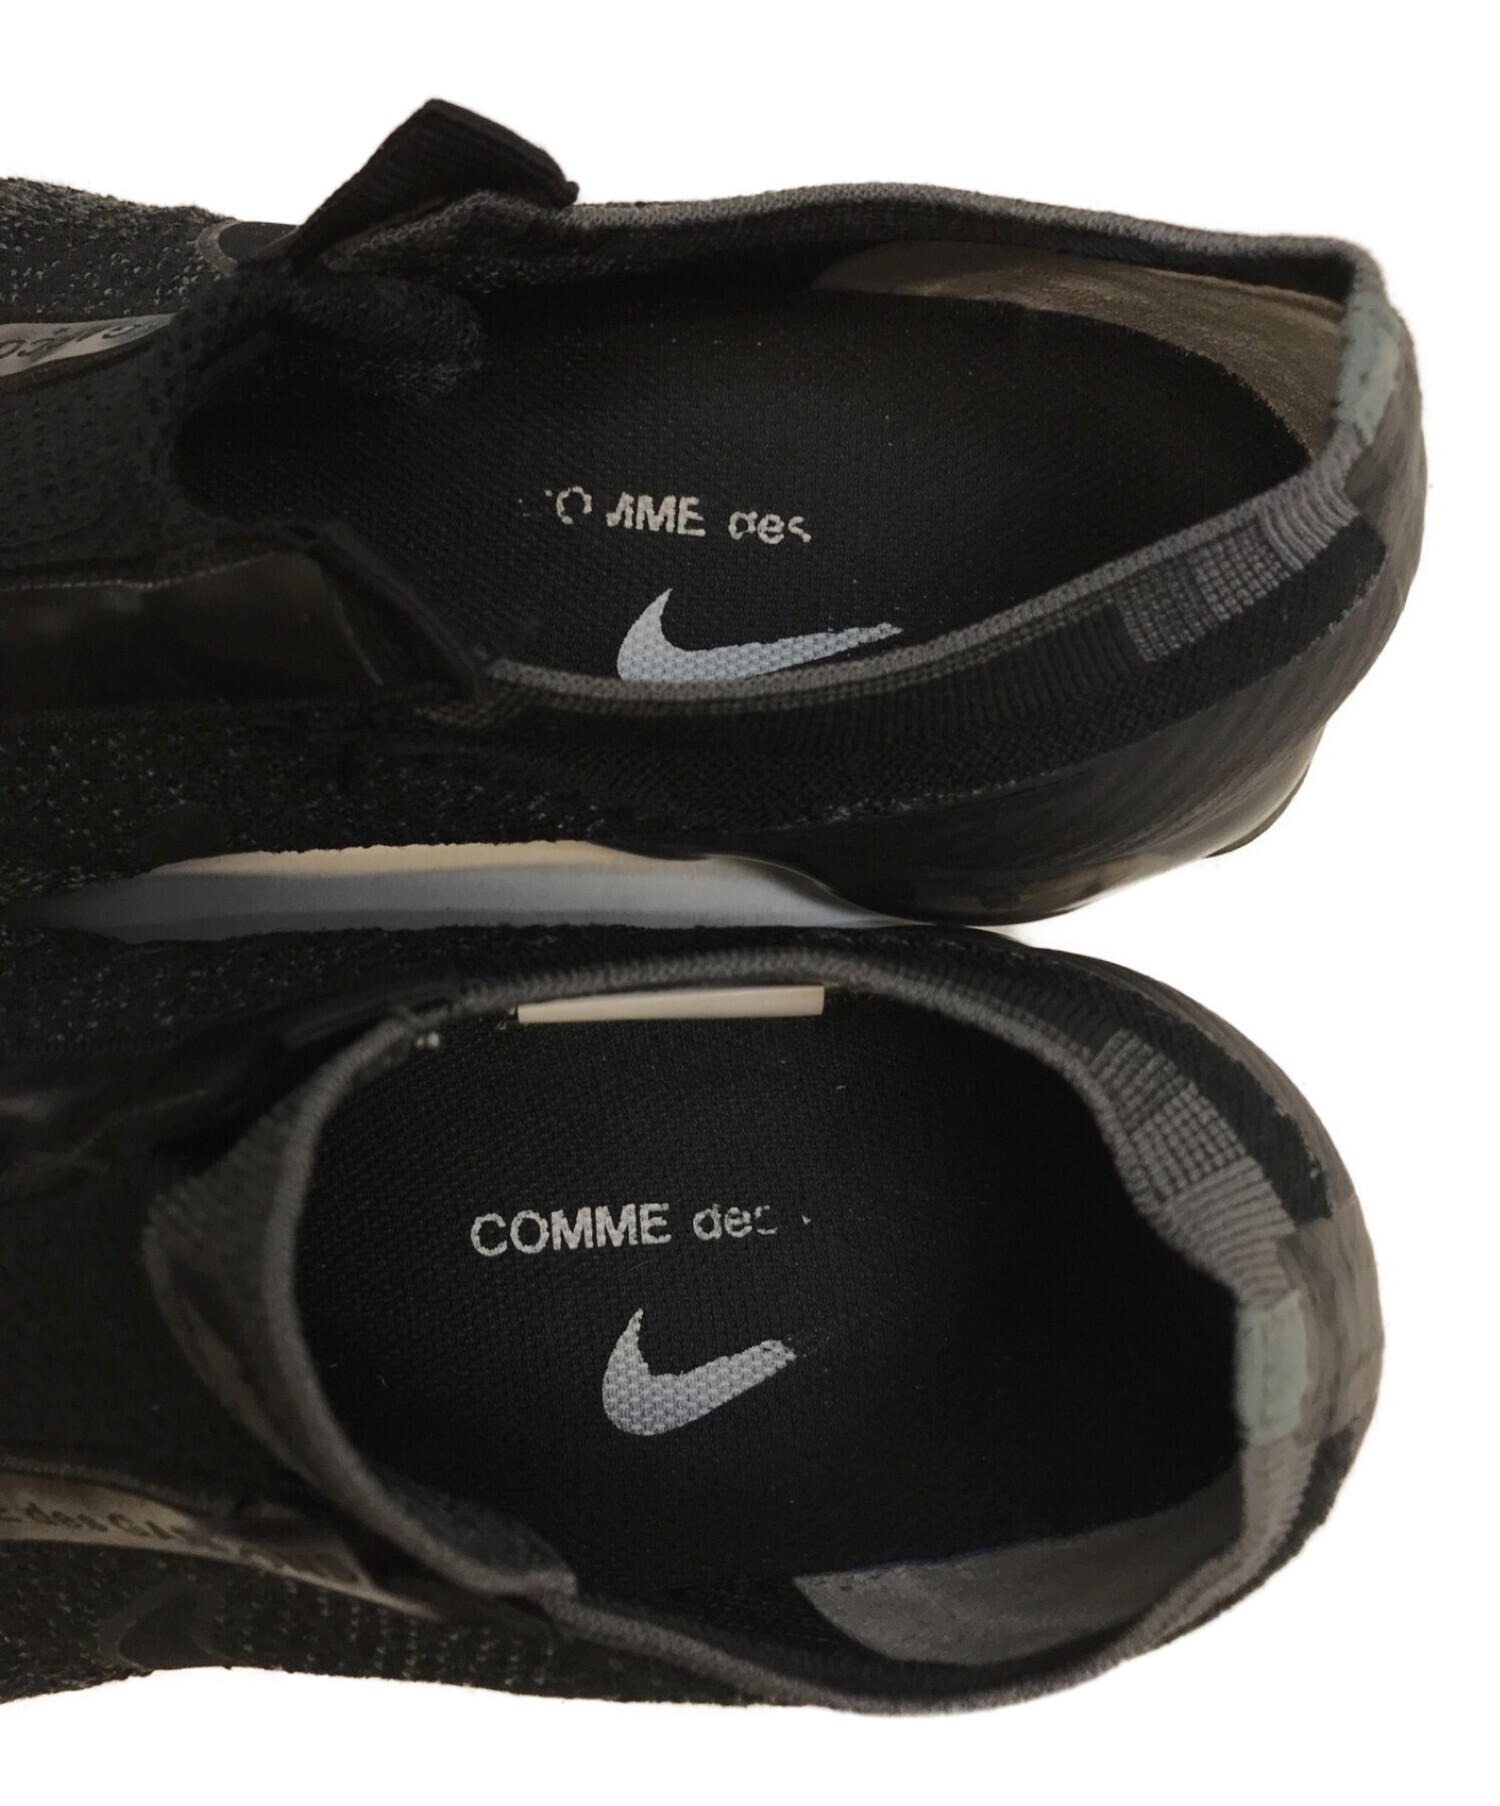 NIKE×COMME des GARCONS (ナイキ×コムデギャルソン) AIR VAPORMAX FK エアヴェイパーマックス コムデギャルソン  ブラック サイズ:US12